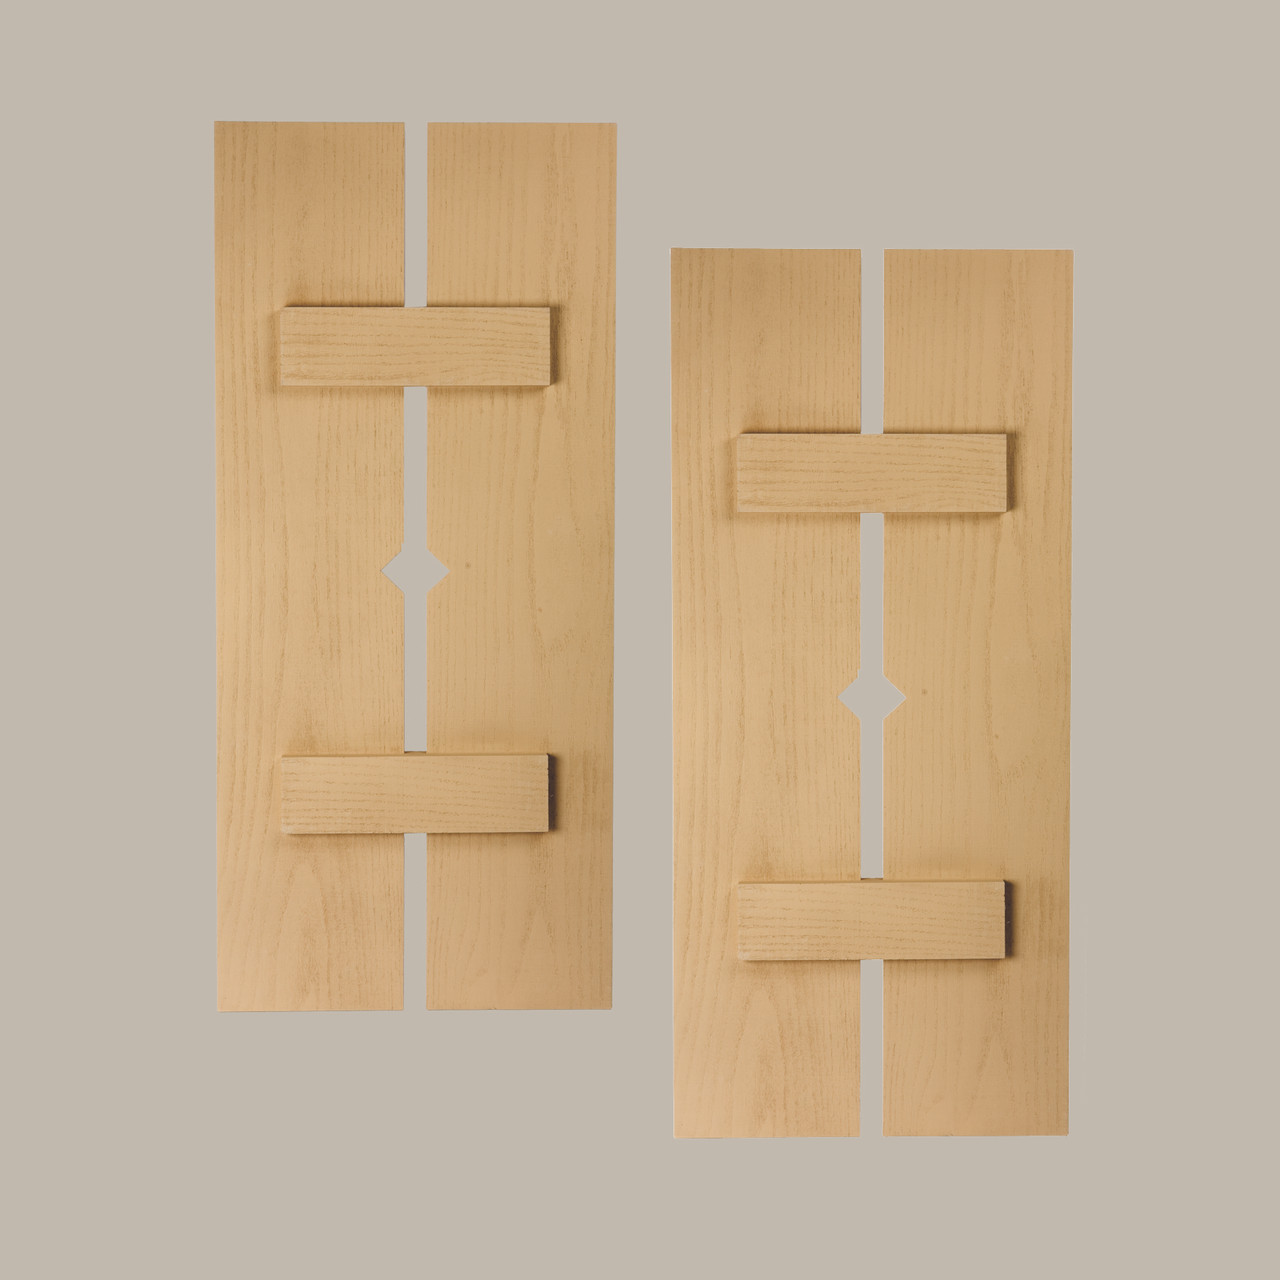 12 inch by 71 inch Plank Shutter with 2-Plank, Diamond